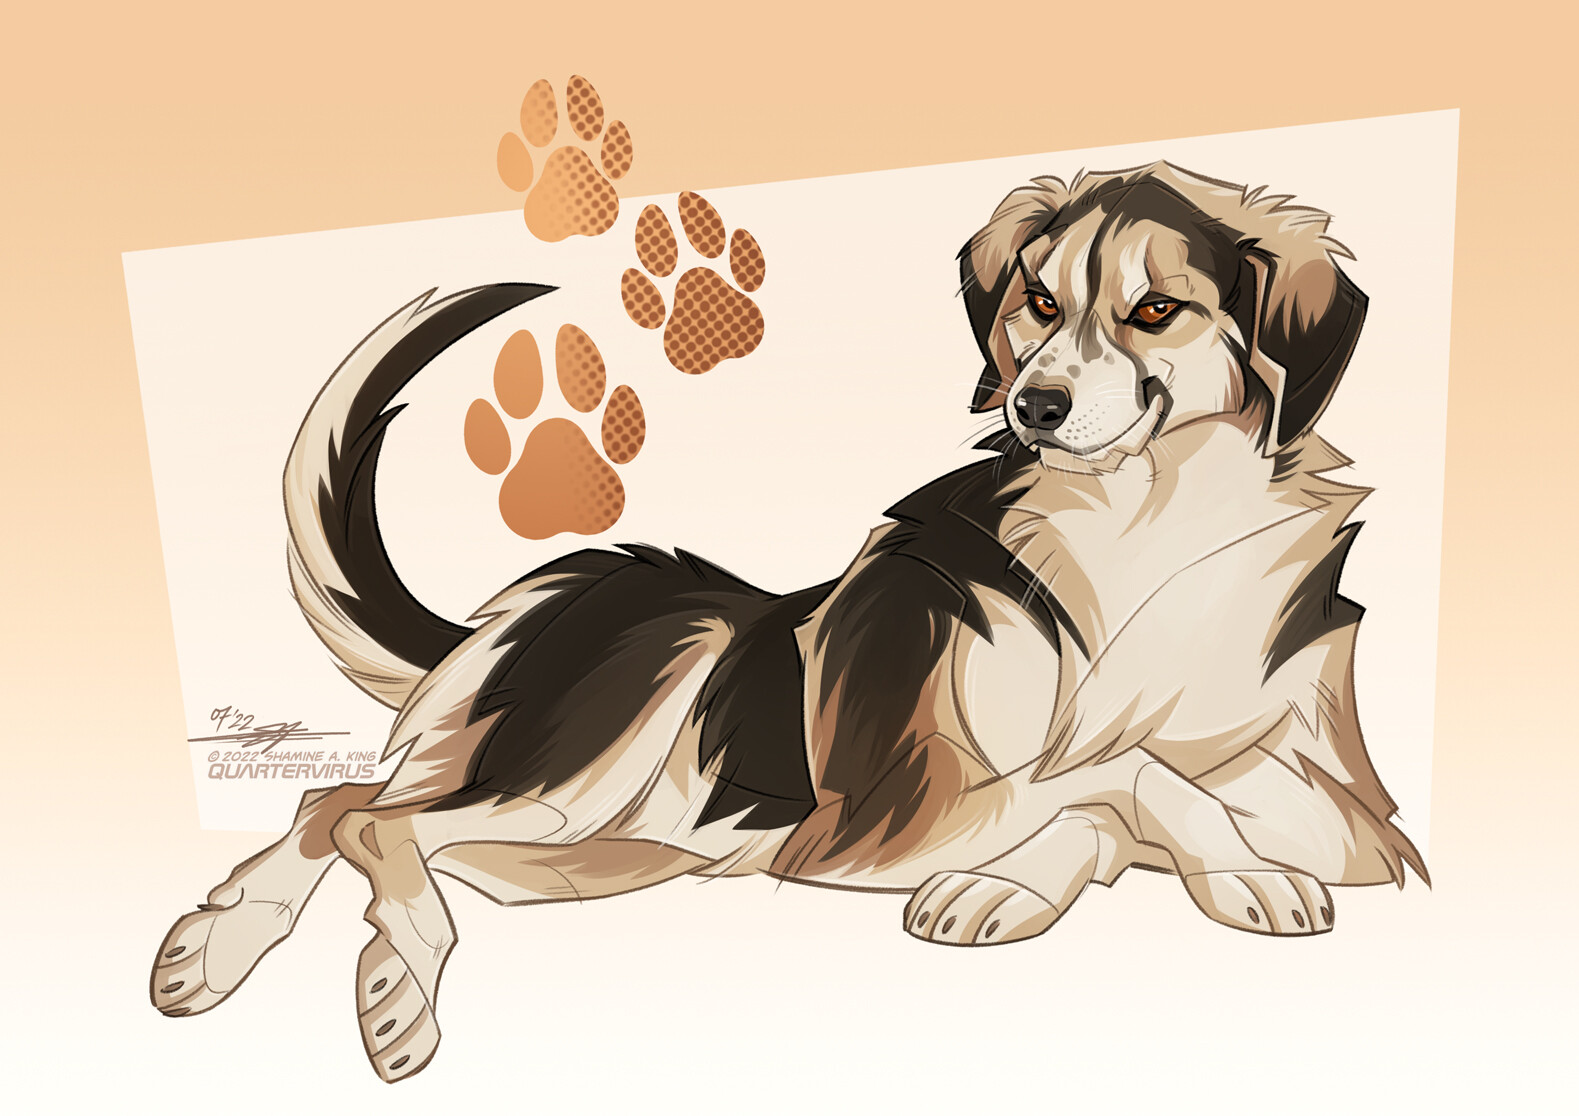 I've been very busy this month with finally moving to my own flat! In between packing, building IKEA furniture, and getting settled, I've been drawing more dogs from Grekisk Gatu Hundar:
https://grekiskagatuhundar.com/